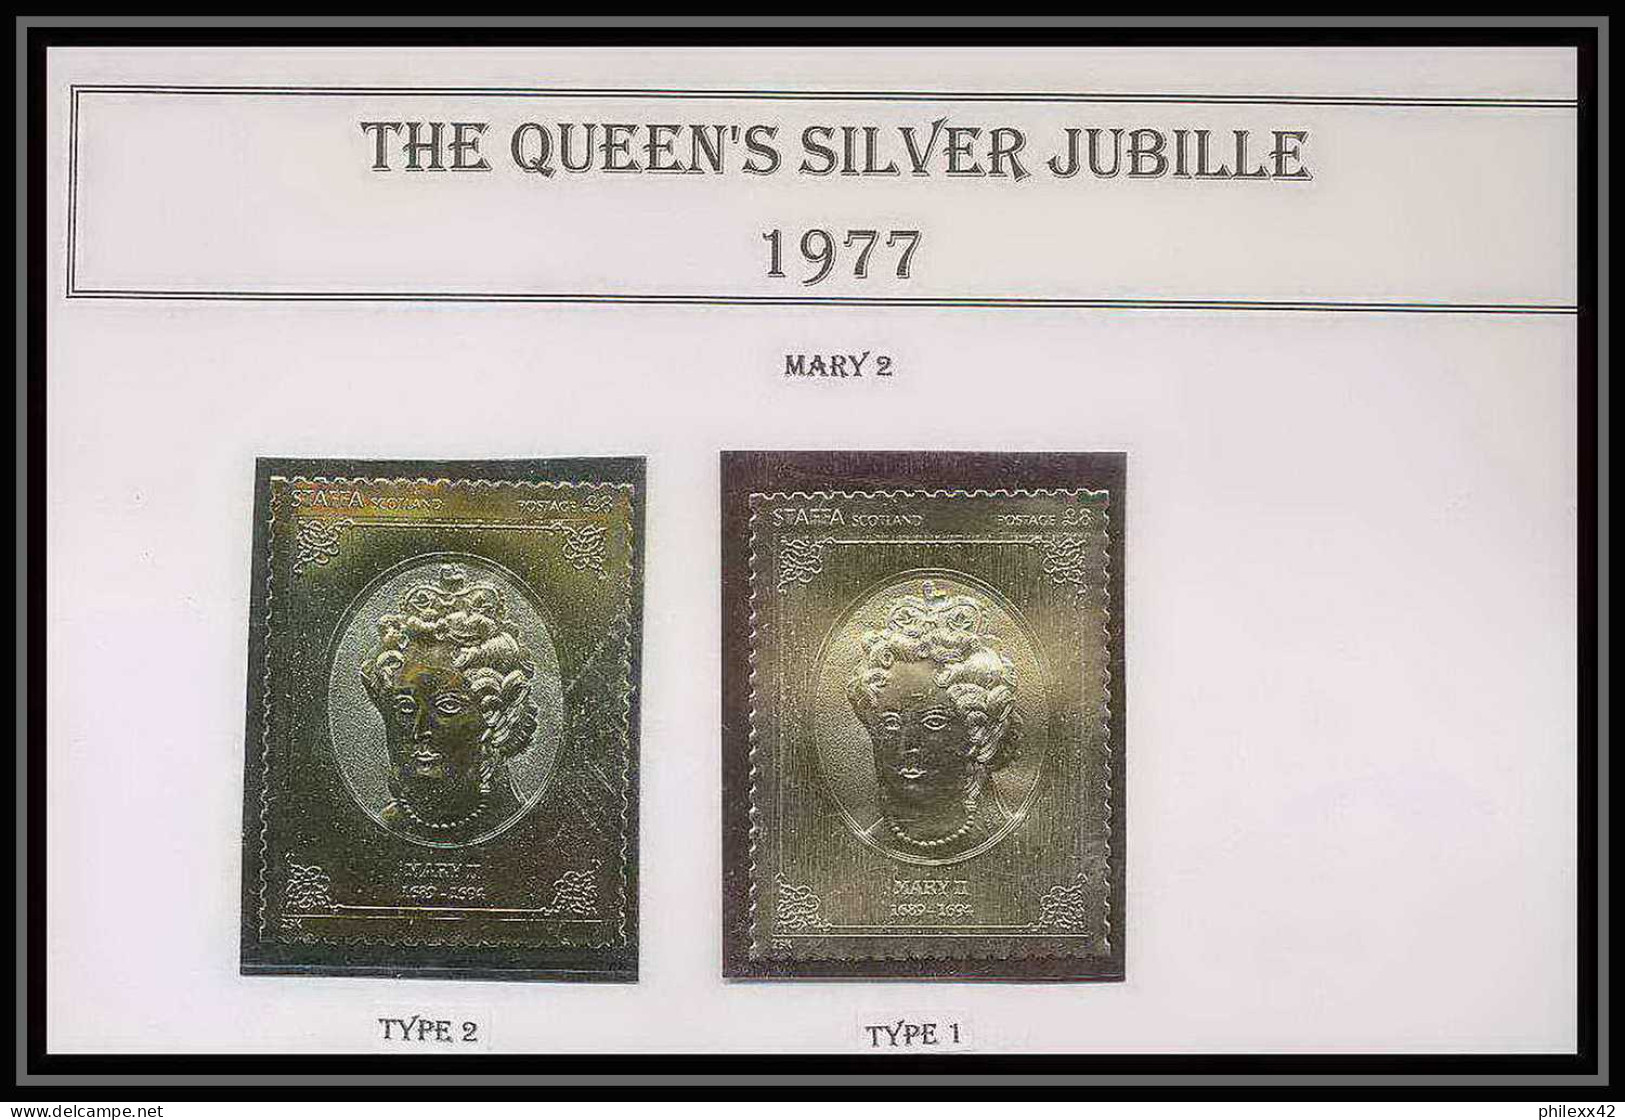 451 Staffa Scotland The Queen's Silver Jubilee 1977 OR Gold Stamps Monarchy United Kingdom Mary 2 Type 1&2 Neuf** Mnh - Ecosse